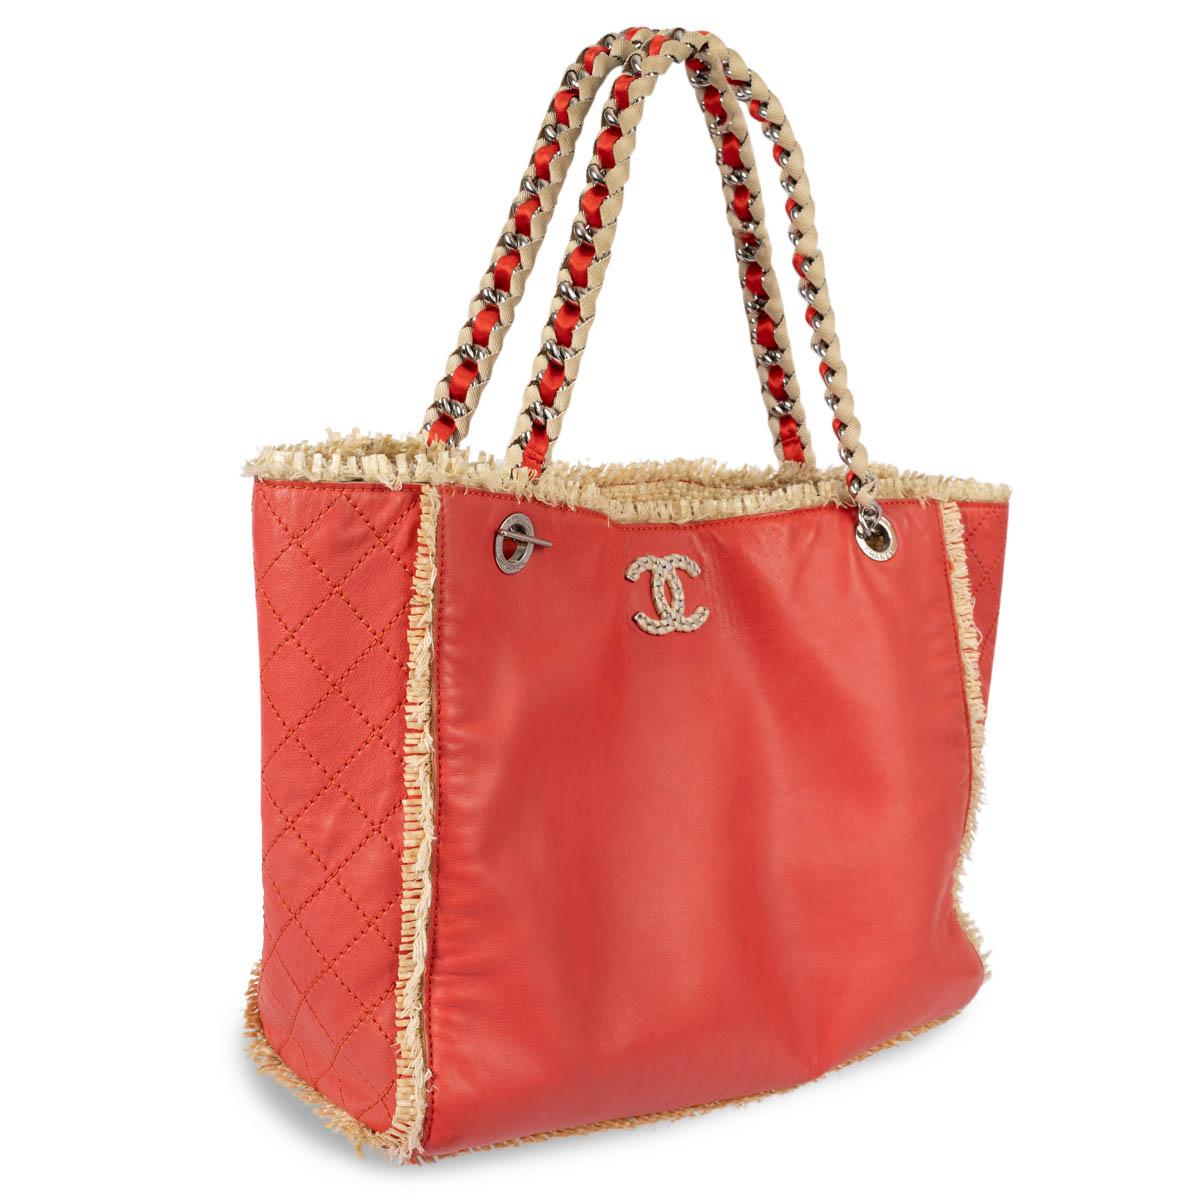 100% authentic Chanel Tweedy shopping tote in smooth coral leather with beige raffia fringed hem, quilted gussets on the side and red satin, beige grosgrain chain-link handles. Opens with a magnetic button on top and is lined in beige raffia with a